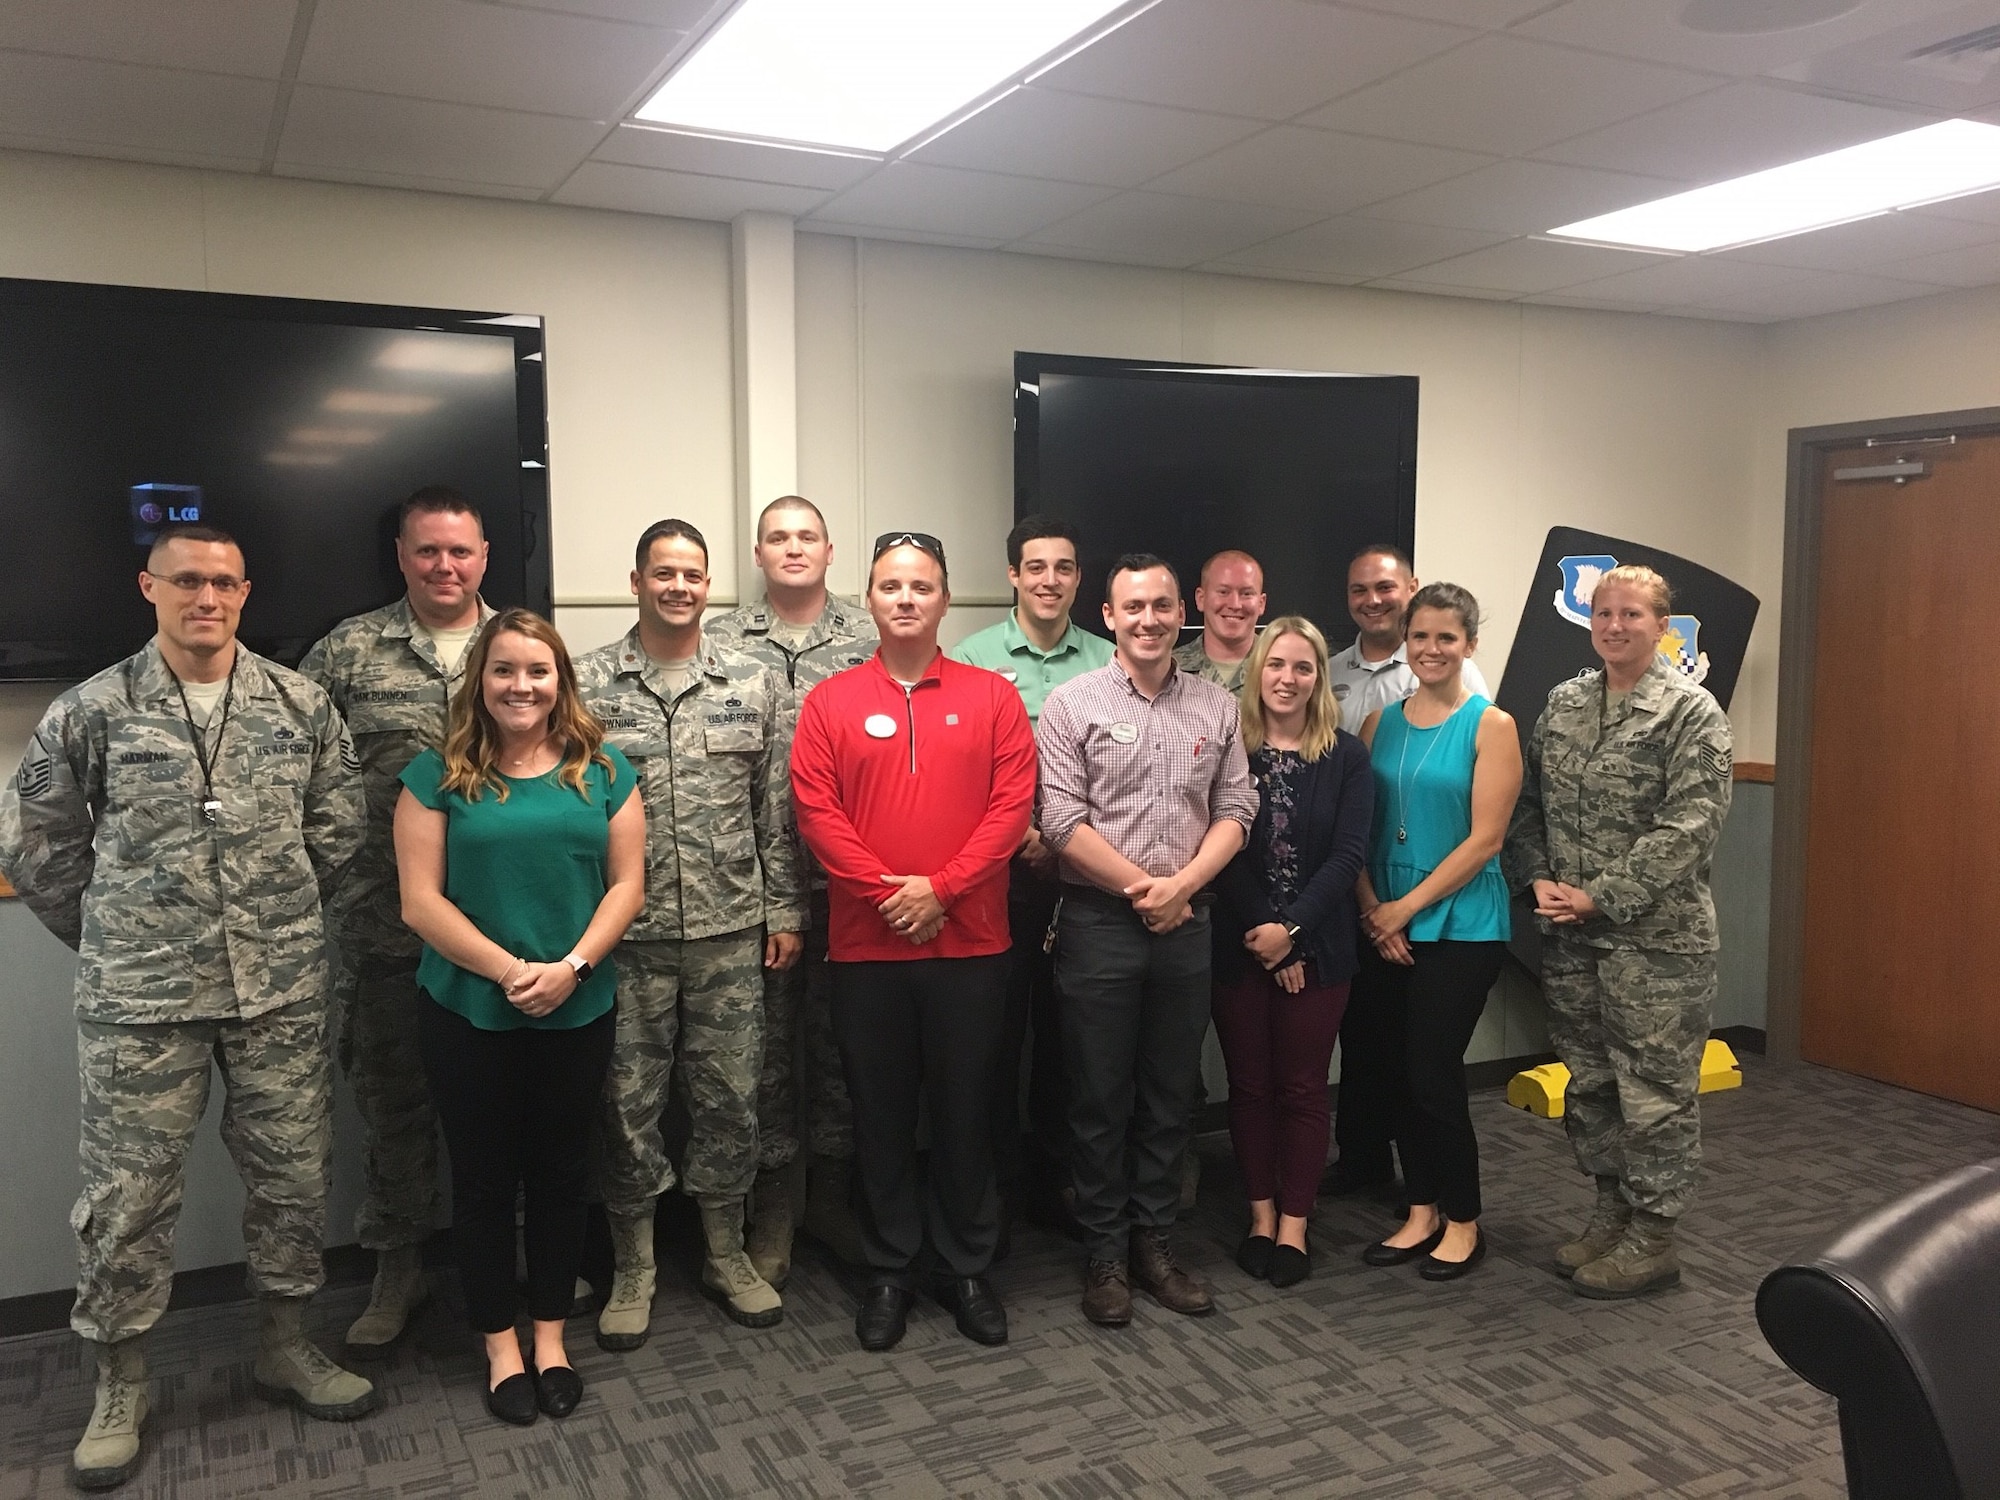 Airmen from the 22nd Maintenance Group pose for a photo with Chick-fil-A members June 27, 2017, at McConnell Air Force Base, Kansas. The group came together to talk about leadership topics and different ways to enhance the relationship between the base and the community. (Courtesy photo)